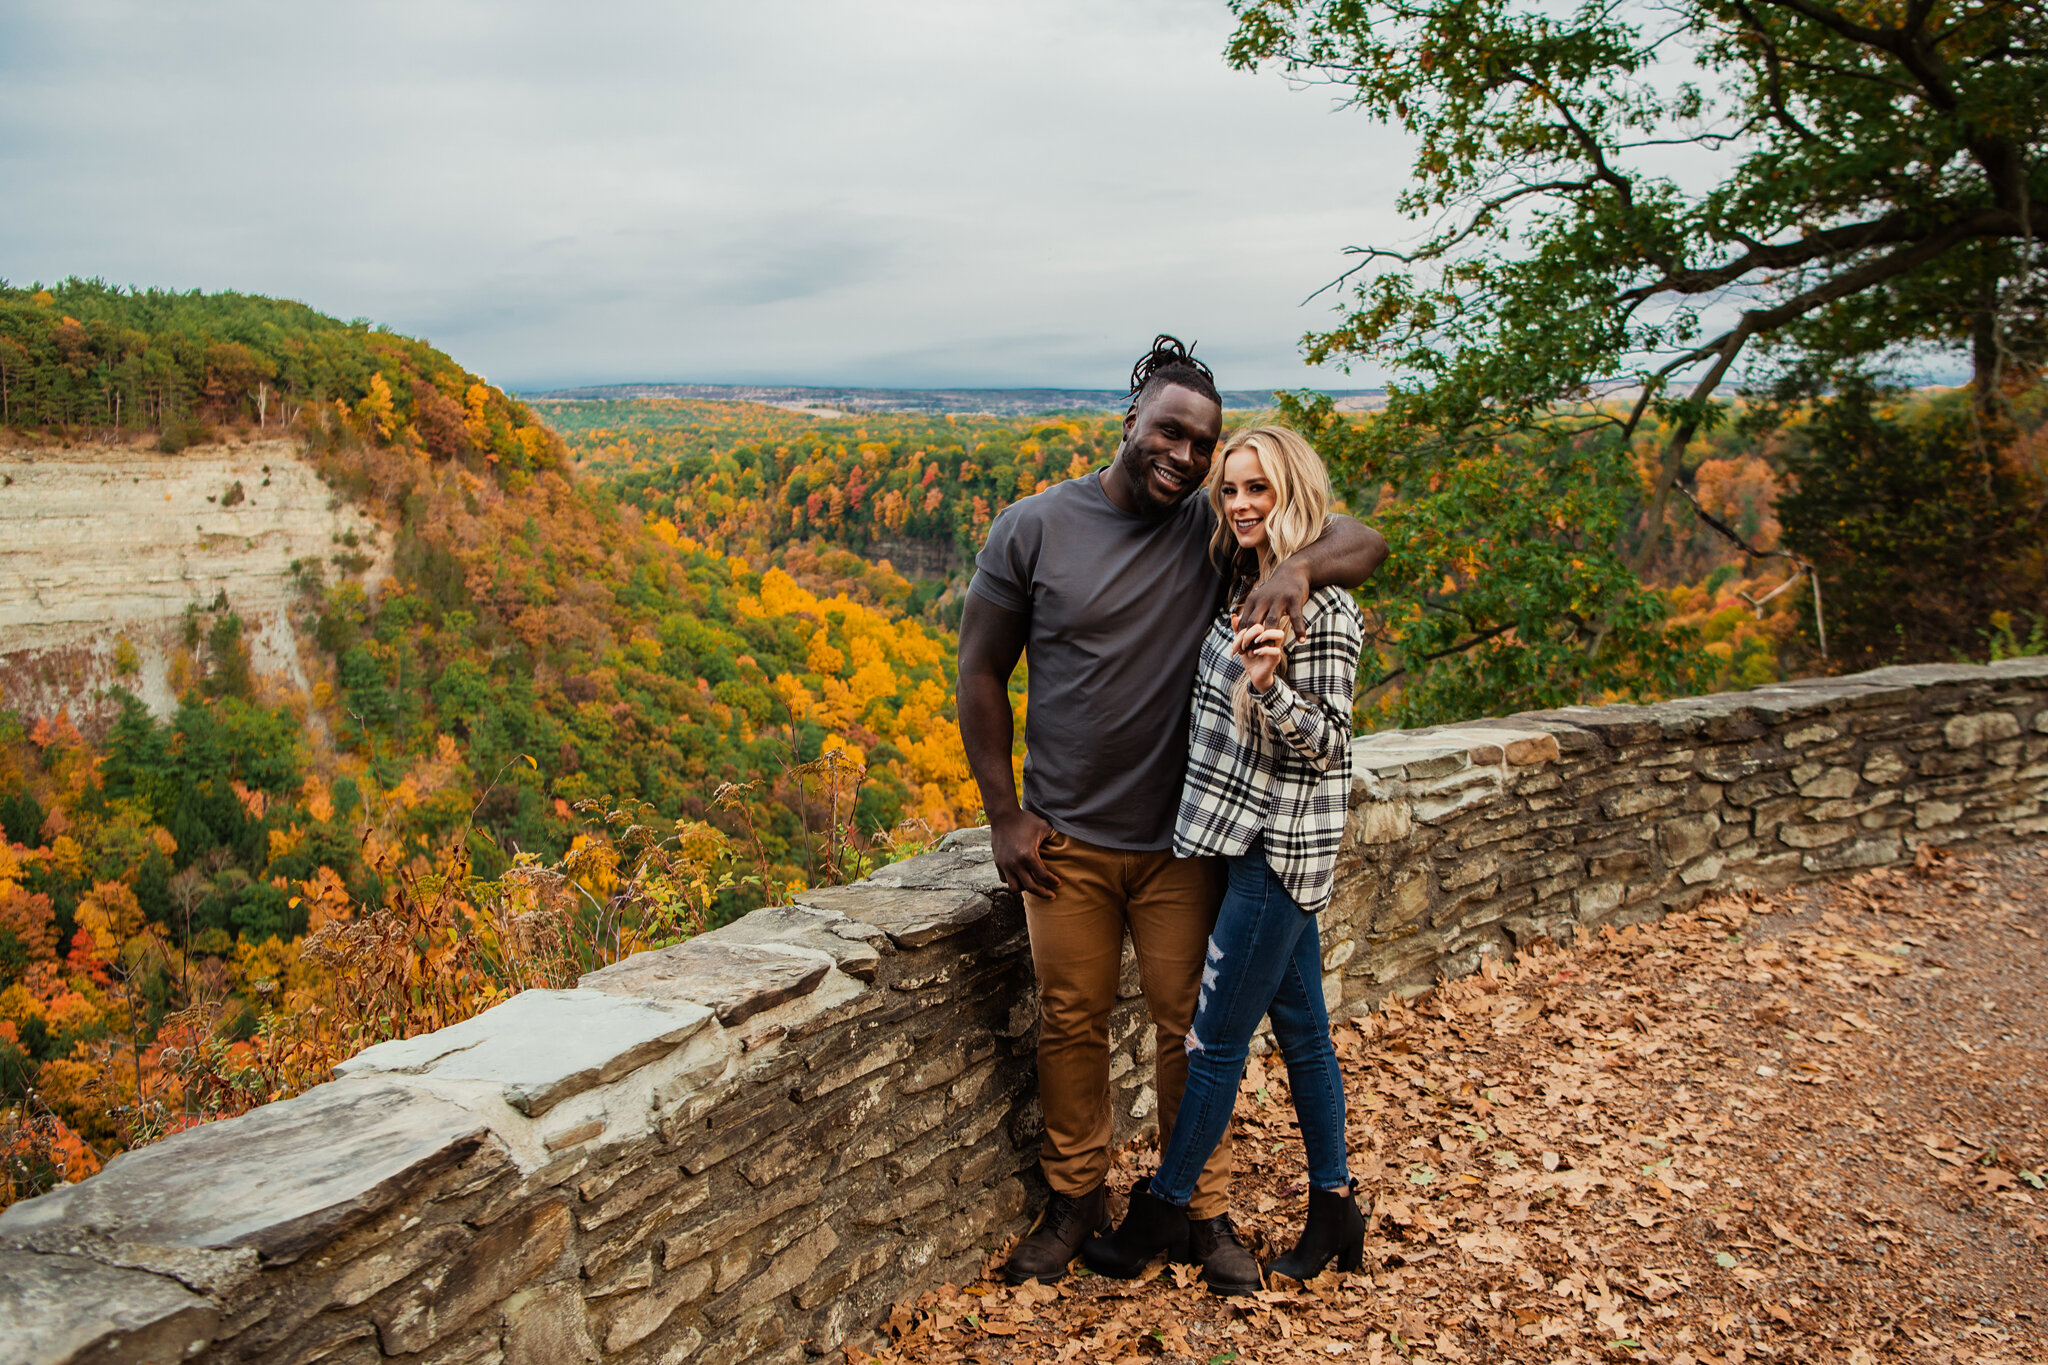 Letchworth_State_Park_Rochester_Couples_Session_JILL_STUDIO_Rochester_NY_Photographer_9520.jpg